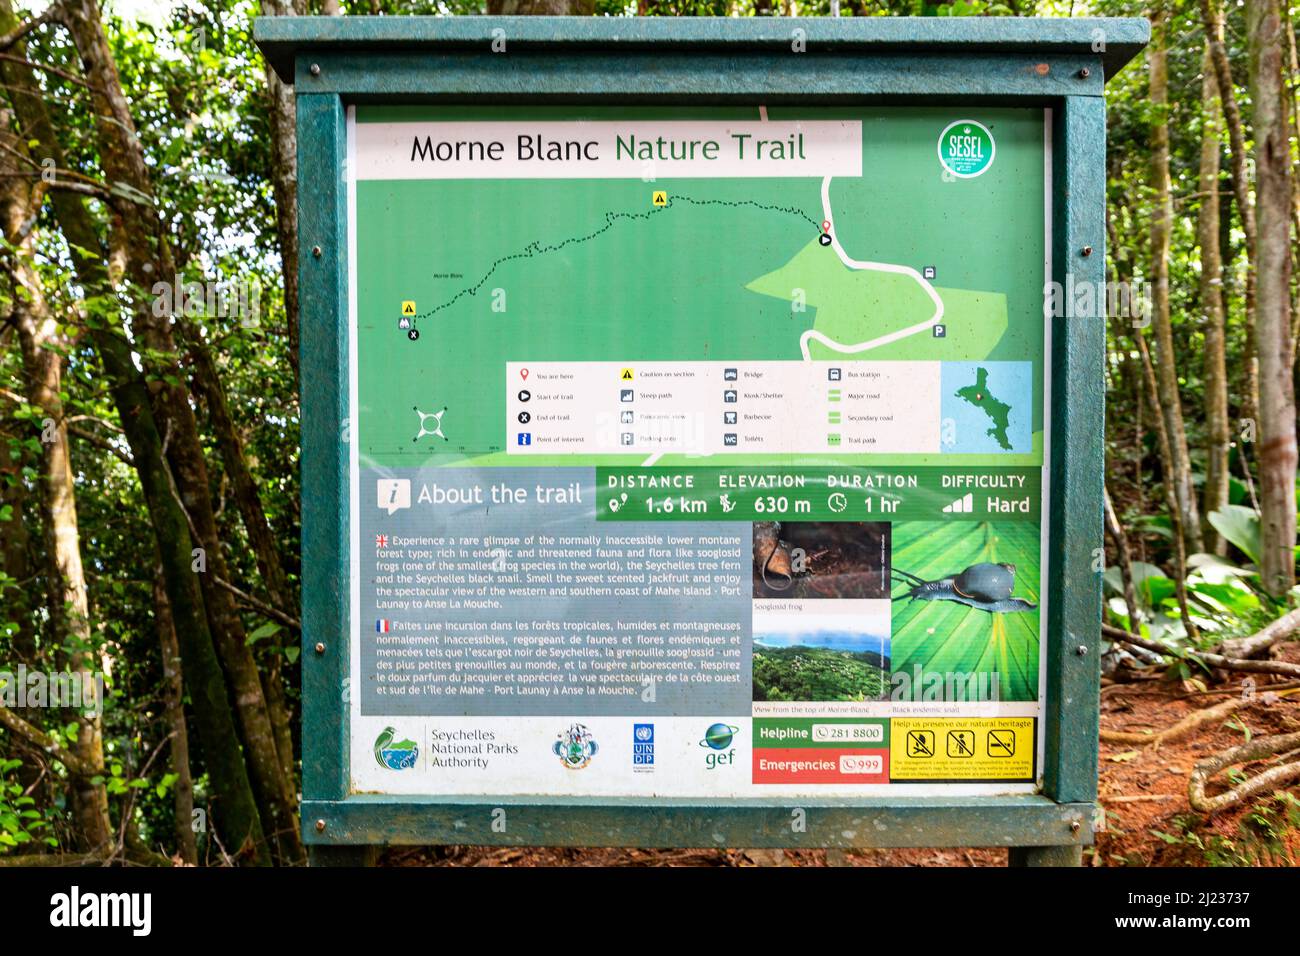 Mahe, Seychelles, 3.05.2021. Morne Blanc Nature Trail tourist information board at the starting point of a trail in Morne Seychelles National Park. Stock Photo